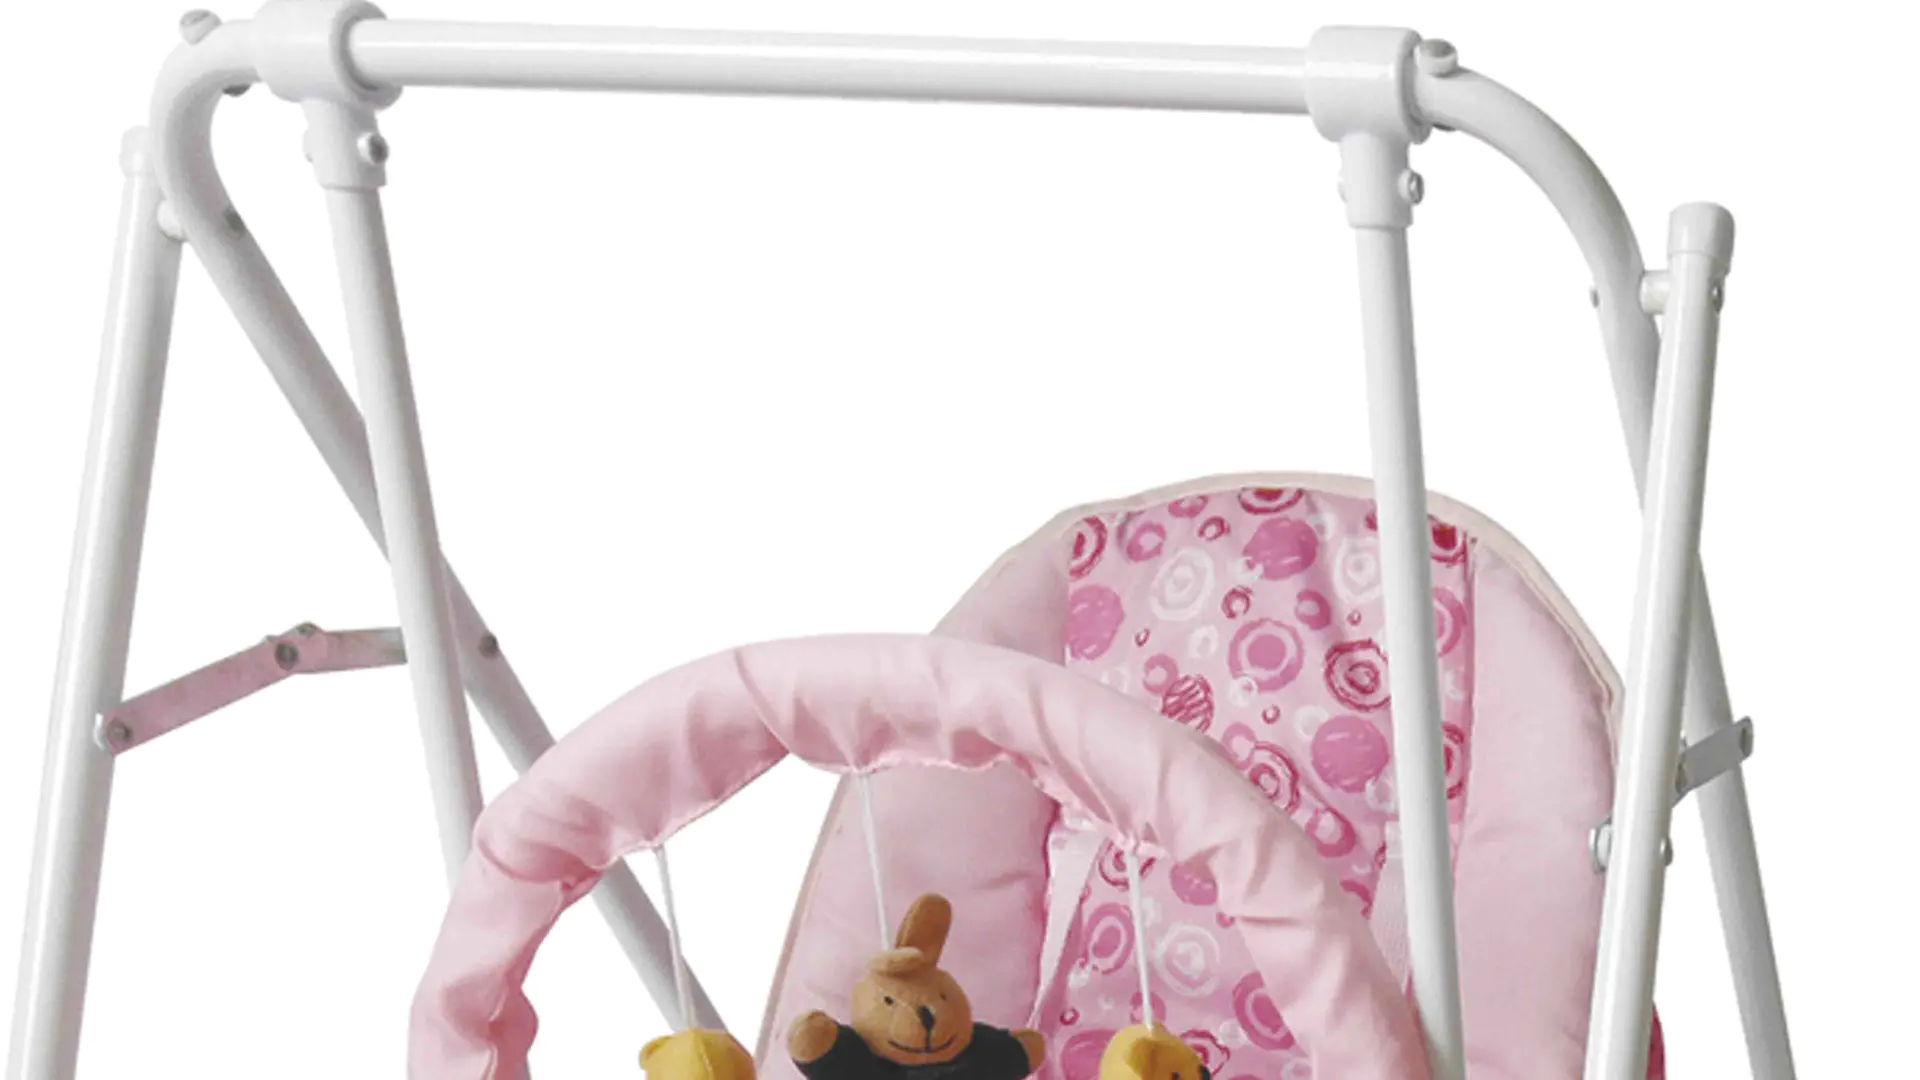 Custom toys double cheap baby swings for sale Aoqi baby